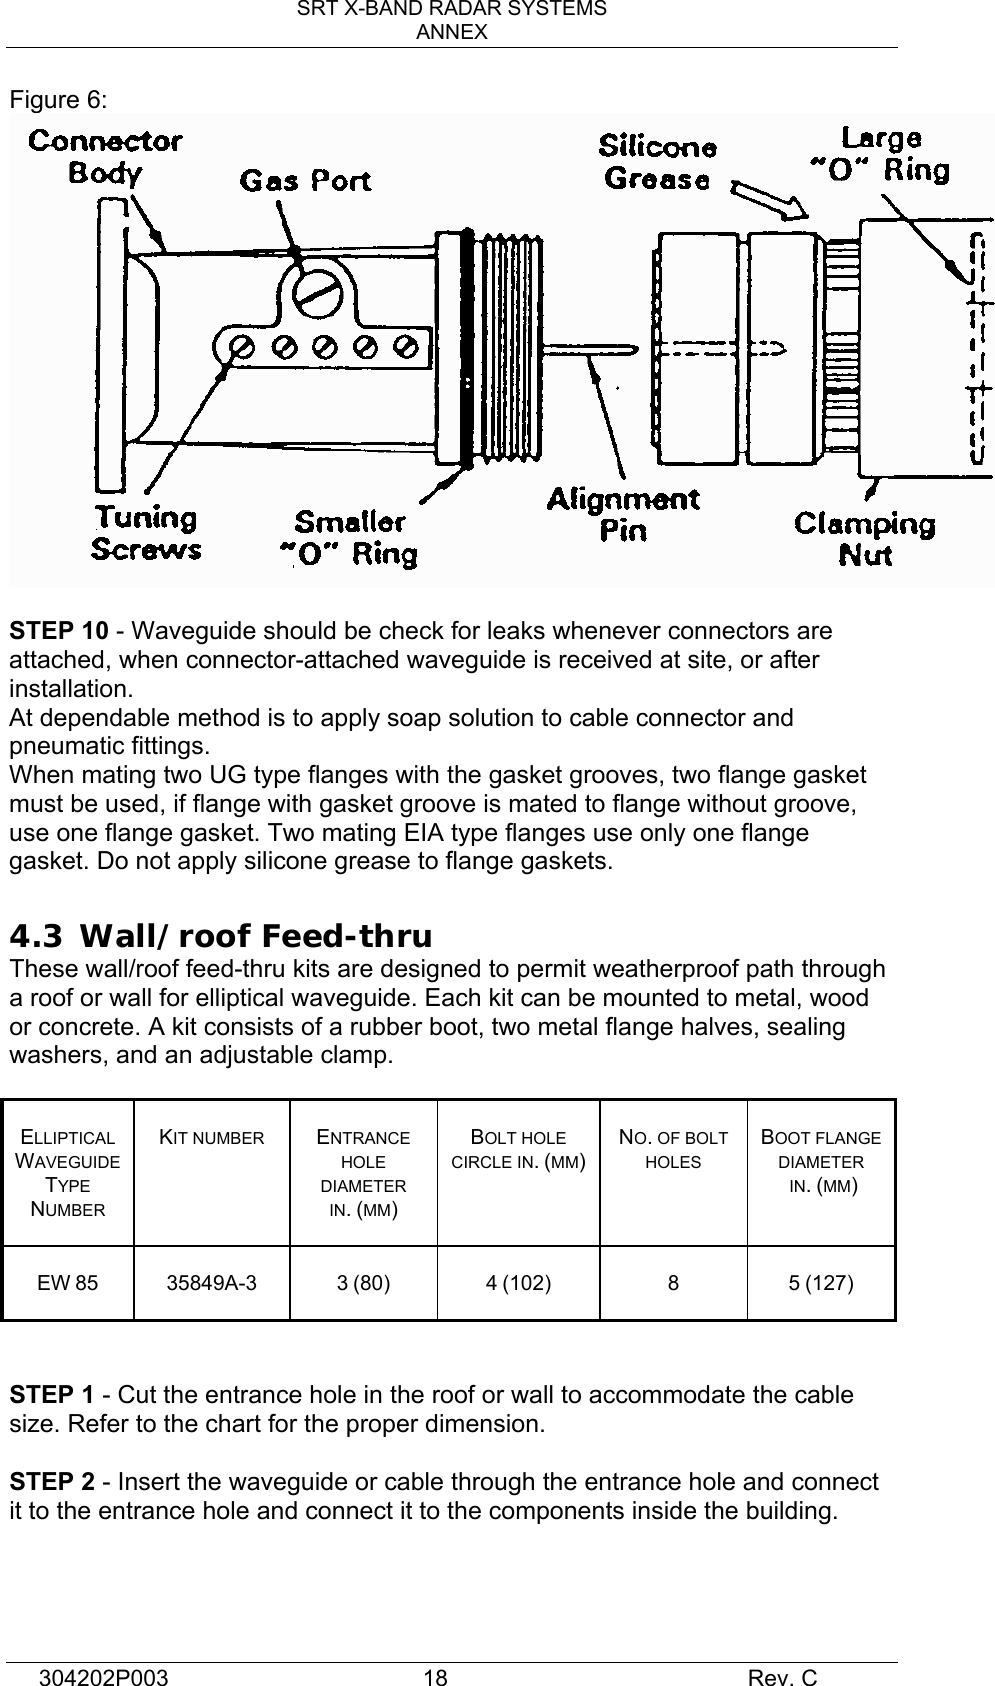 SRT X-BAND RADAR SYSTEMS ANNEX 304202P003  18     Rev. C Figure 6:   STEP 10 - Waveguide should be check for leaks whenever connectors are attached, when connector-attached waveguide is received at site, or after installation. At dependable method is to apply soap solution to cable connector and pneumatic fittings. When mating two UG type flanges with the gasket grooves, two flange gasket must be used, if flange with gasket groove is mated to flange without groove, use one flange gasket. Two mating EIA type flanges use only one flange gasket. Do not apply silicone grease to flange gaskets.  4.3  Wall/roof Feed-thru These wall/roof feed-thru kits are designed to permit weatherproof path through a roof or wall for elliptical waveguide. Each kit can be mounted to metal, wood or concrete. A kit consists of a rubber boot, two metal flange halves, sealing washers, and an adjustable clamp.   ELLIPTICAL WAVEGUIDE TYPE NUMBER   KIT NUMBER  ENTRANCE HOLE DIAMETER IN. (MM)  BOLT HOLE CIRCLE IN. (MM)  NO. OF BOLT HOLES  BOOT FLANGE DIAMETER  IN. (MM)  EW 85   35849A-3  3 (80)  4 (102)  8  5 (127)   STEP 1 - Cut the entrance hole in the roof or wall to accommodate the cable size. Refer to the chart for the proper dimension.  STEP 2 - Insert the waveguide or cable through the entrance hole and connect it to the entrance hole and connect it to the components inside the building.  